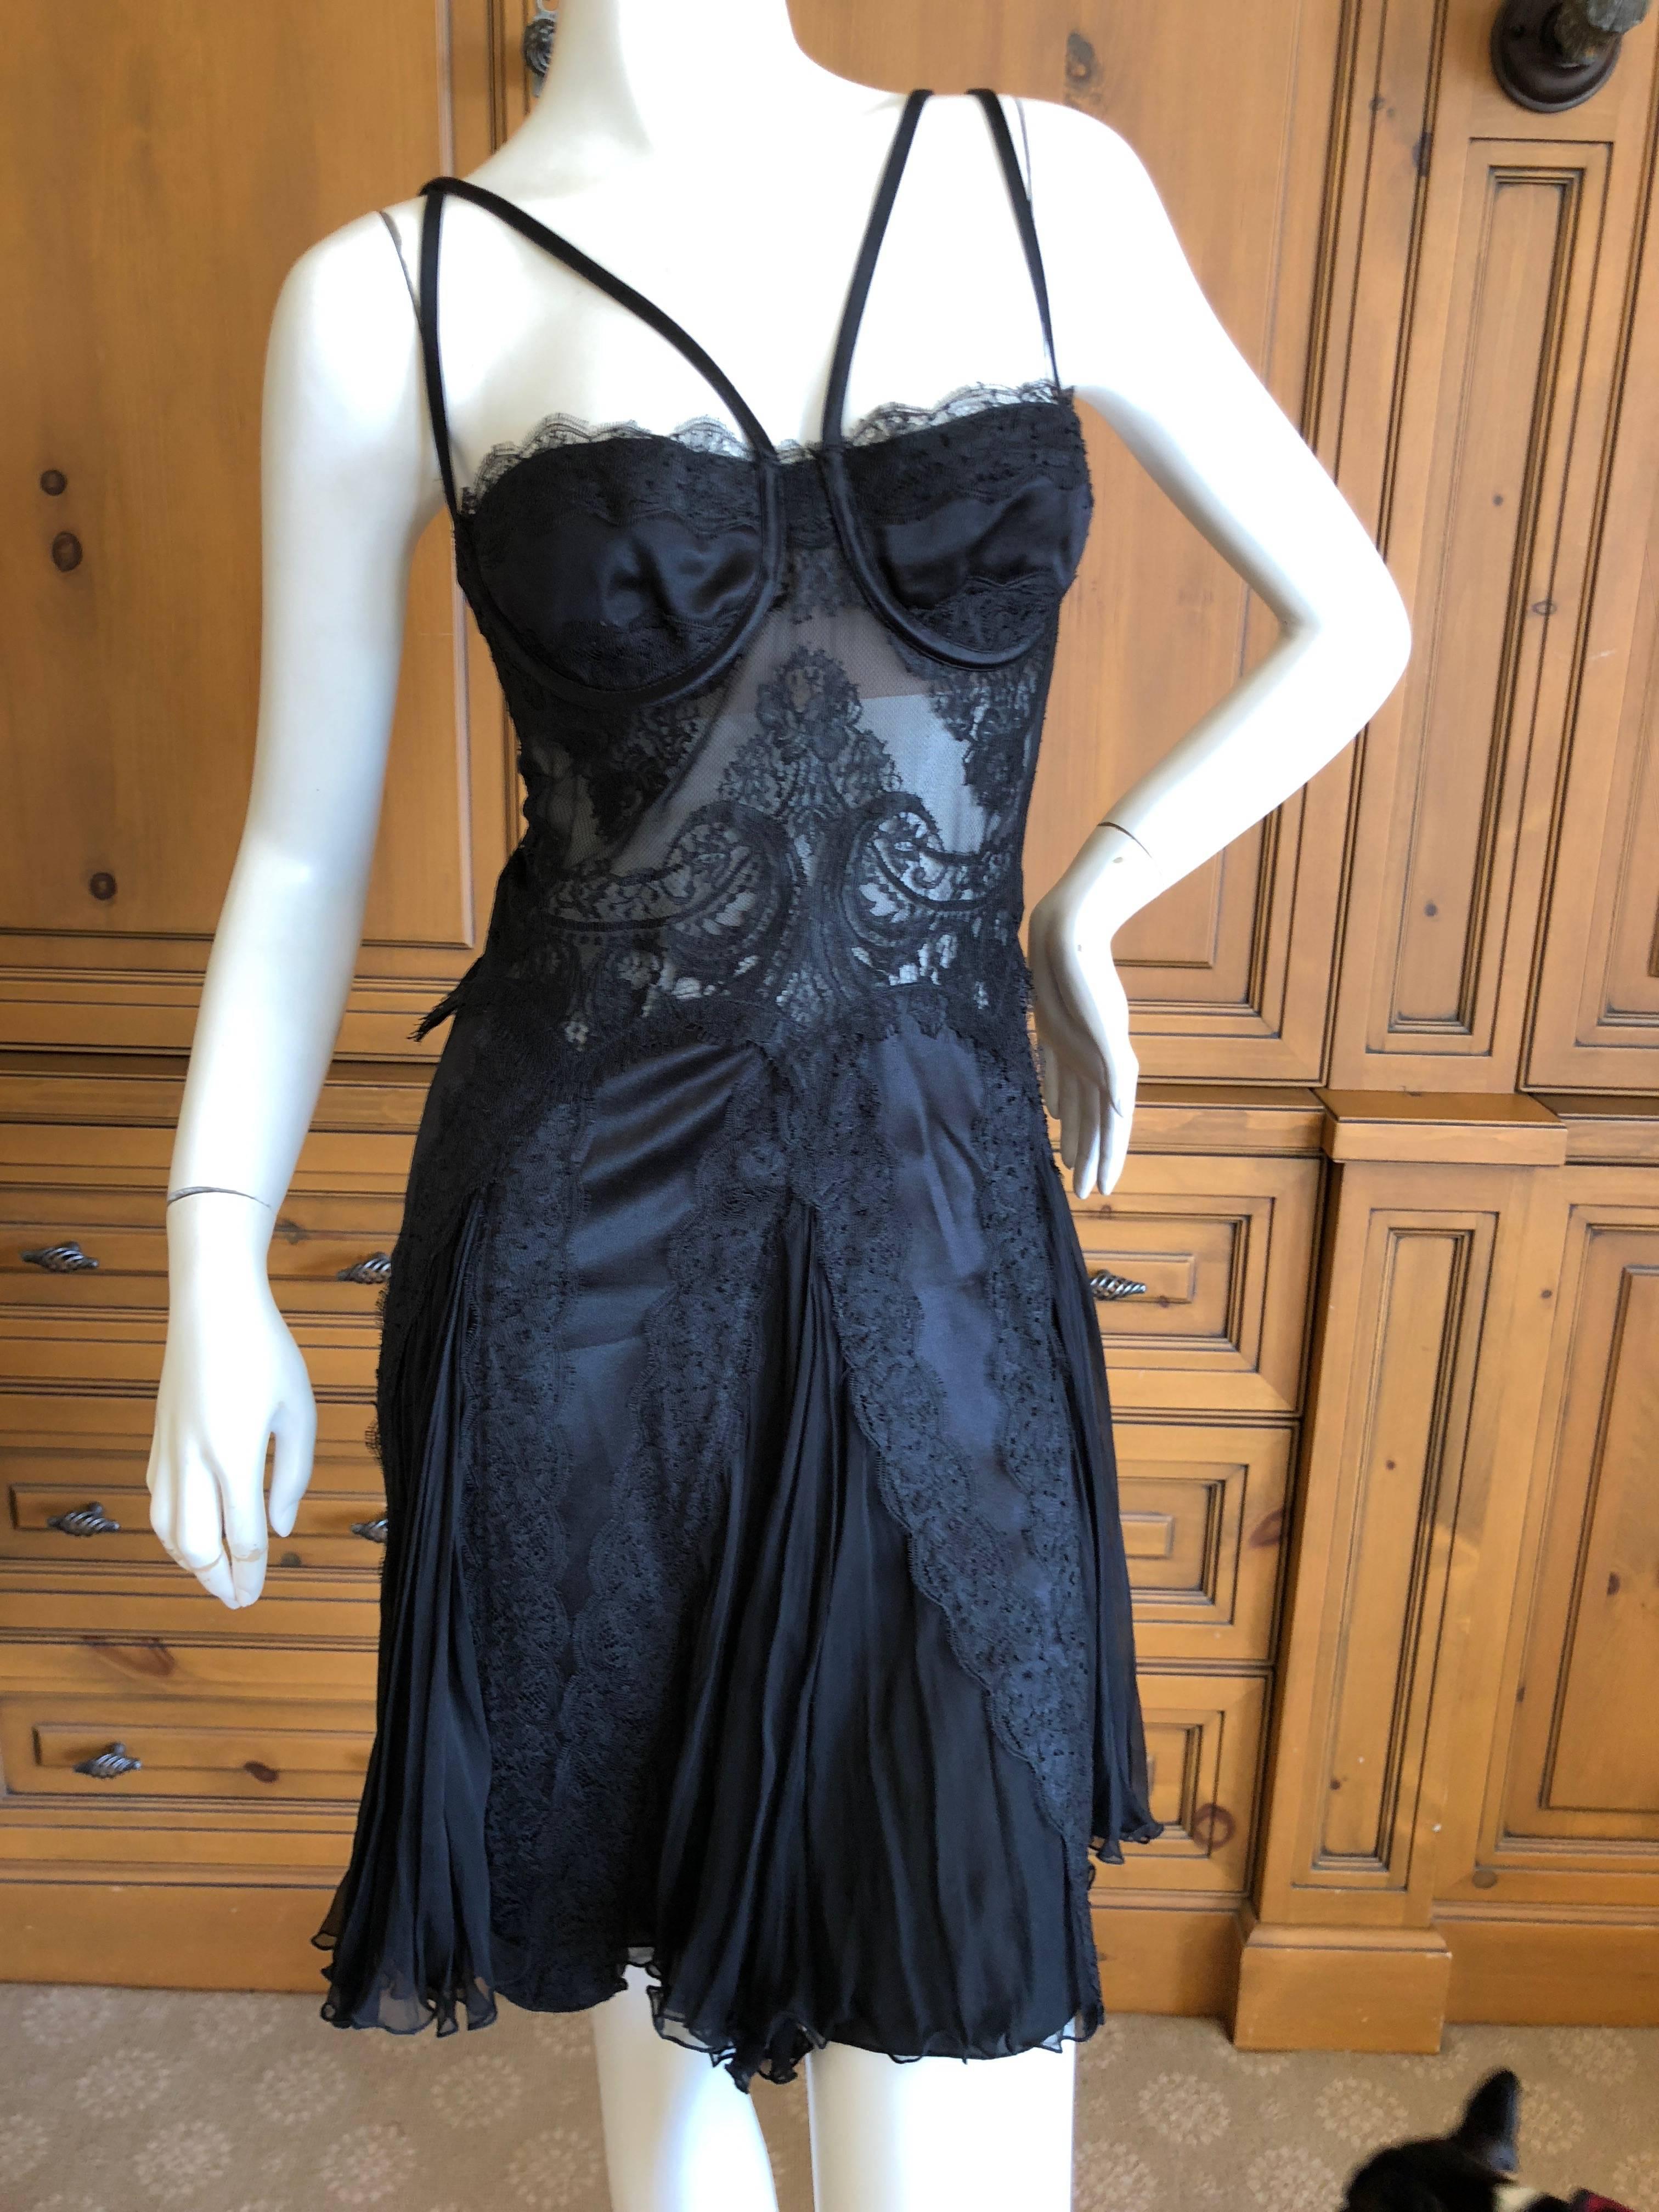 Versace Sheer Lace Accented Vintage Black Lace Cocktail Dress
Supersexy on, this is a wonderful Versace
Size 38
Bust 34